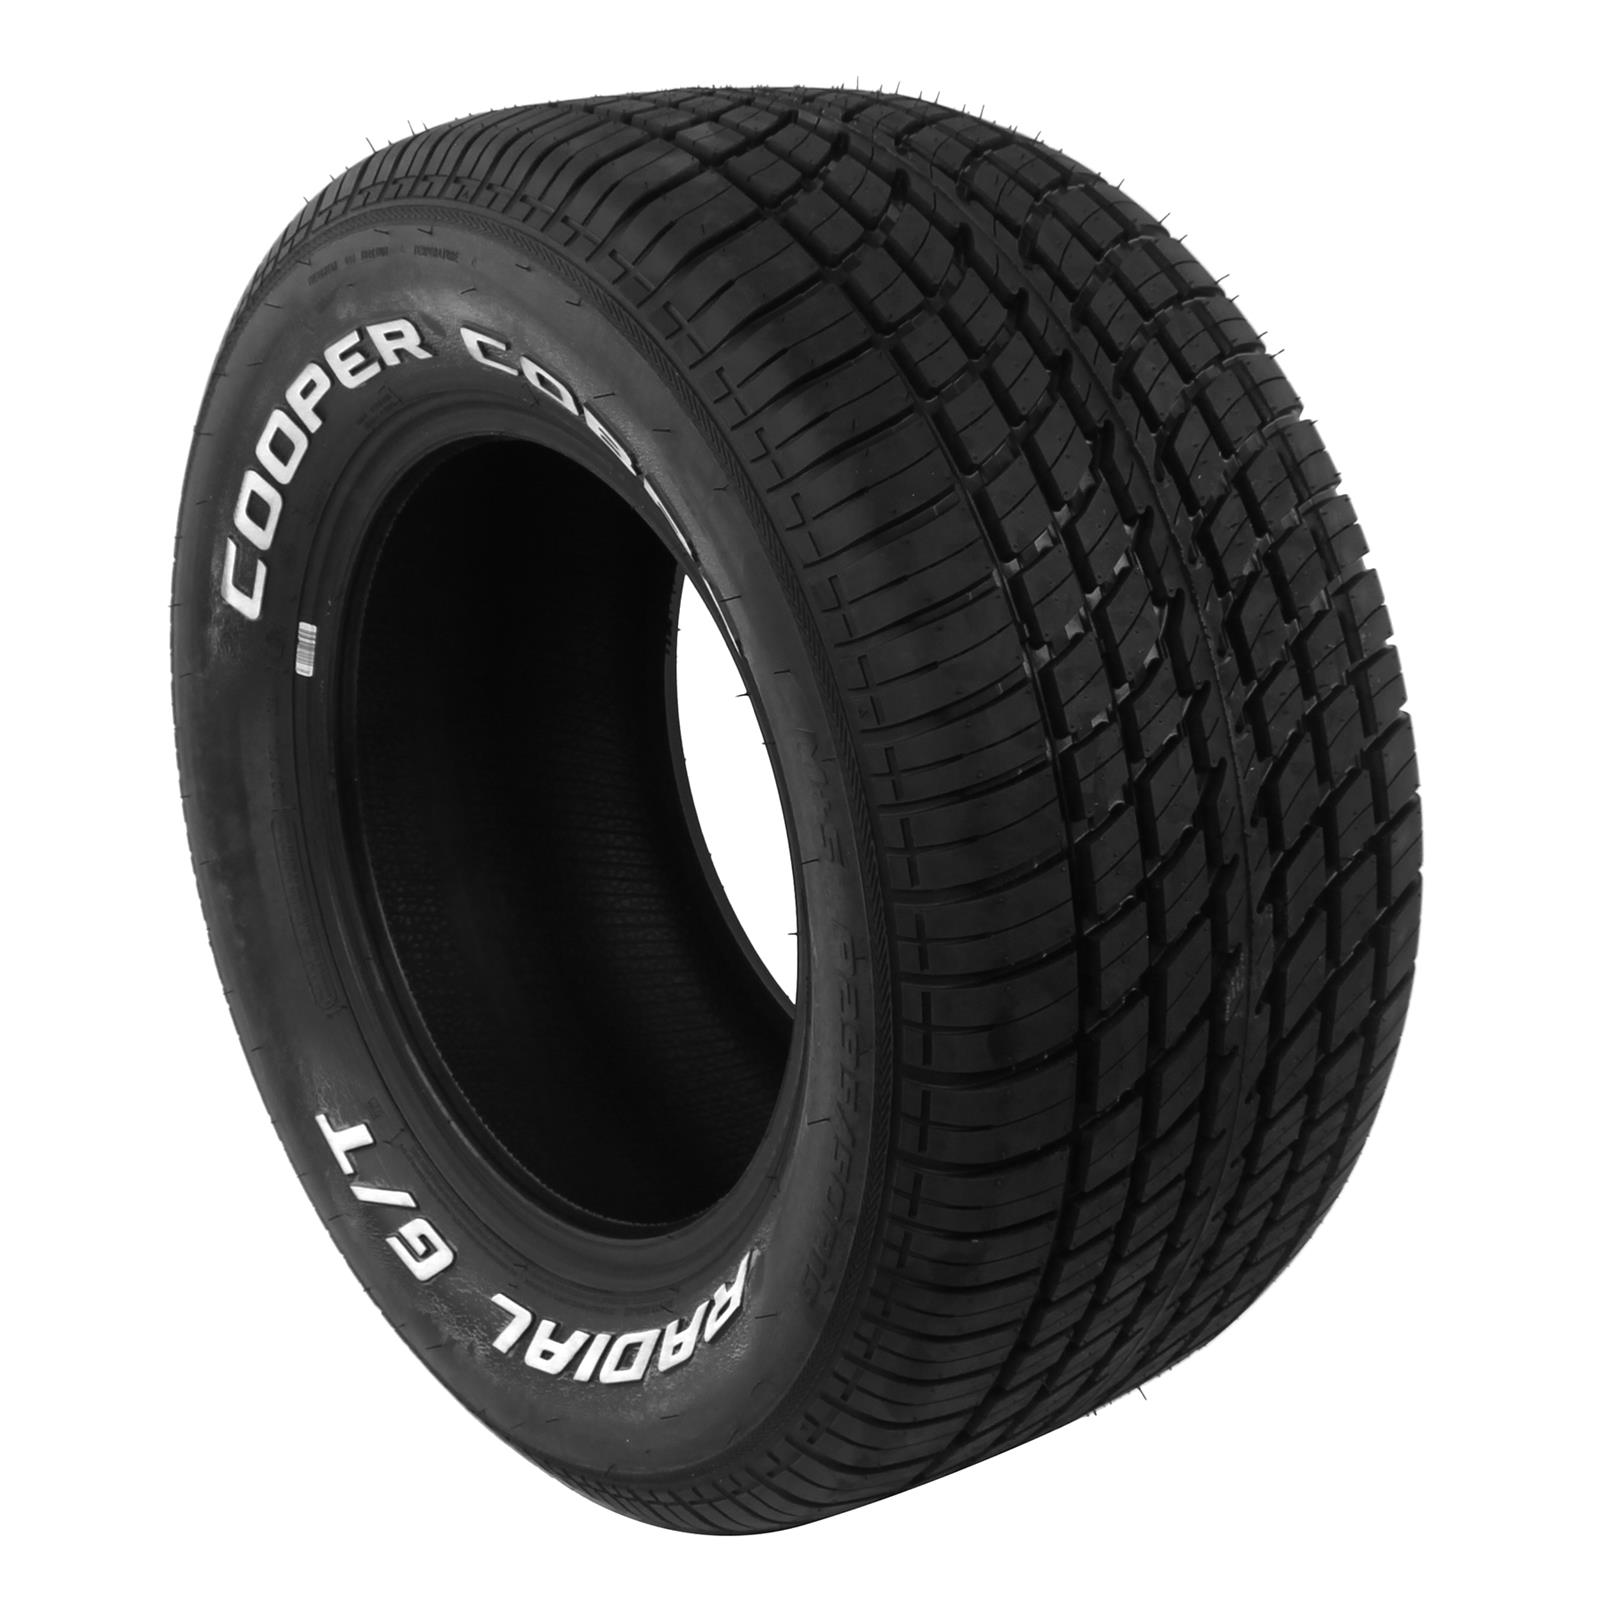 Cooper Cobra 15 inch set of 4 for 15x7/8 and 15x9/10